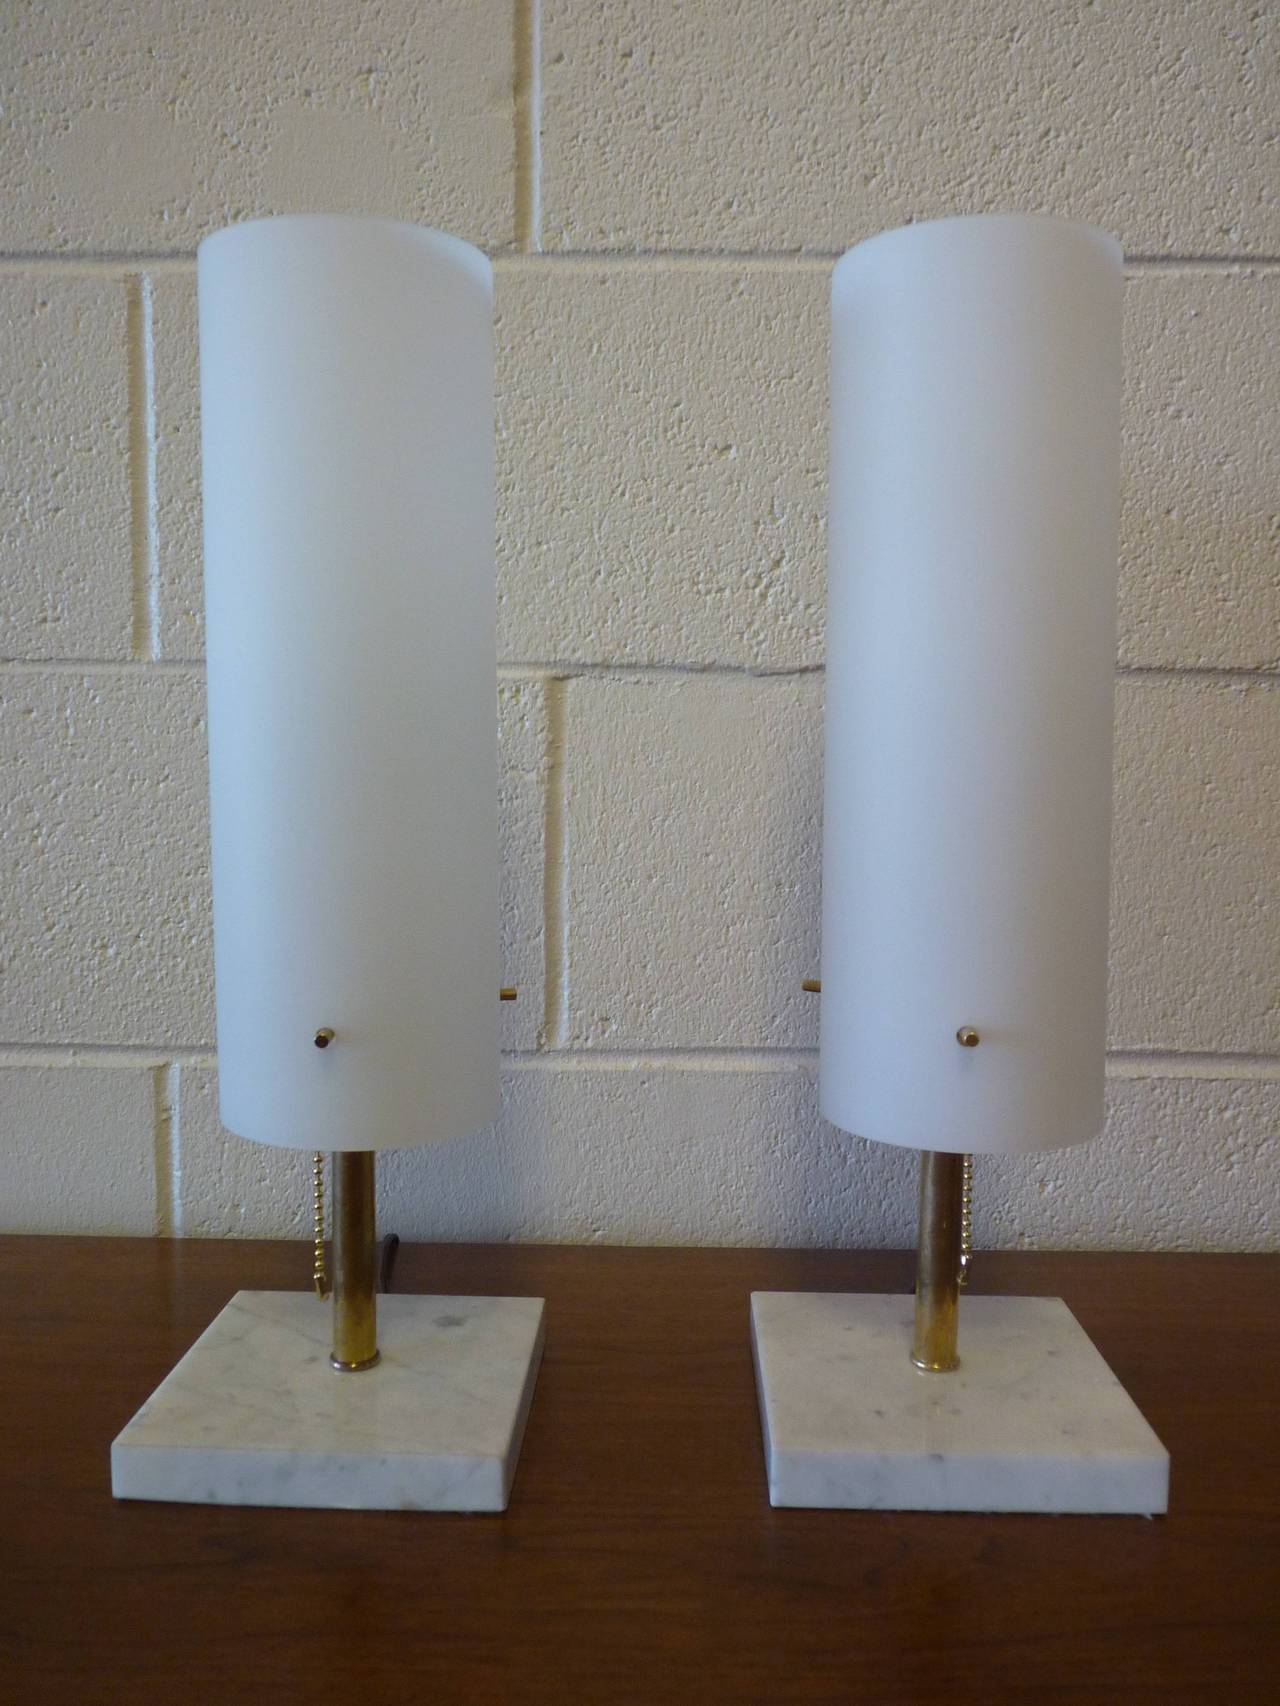 Pair of Murano lamps of brass and marble. Carrara marble base with polished brass stem and hardware float glass shade. Recently rewired and ready for installation. Diameter of glass shade measures 4